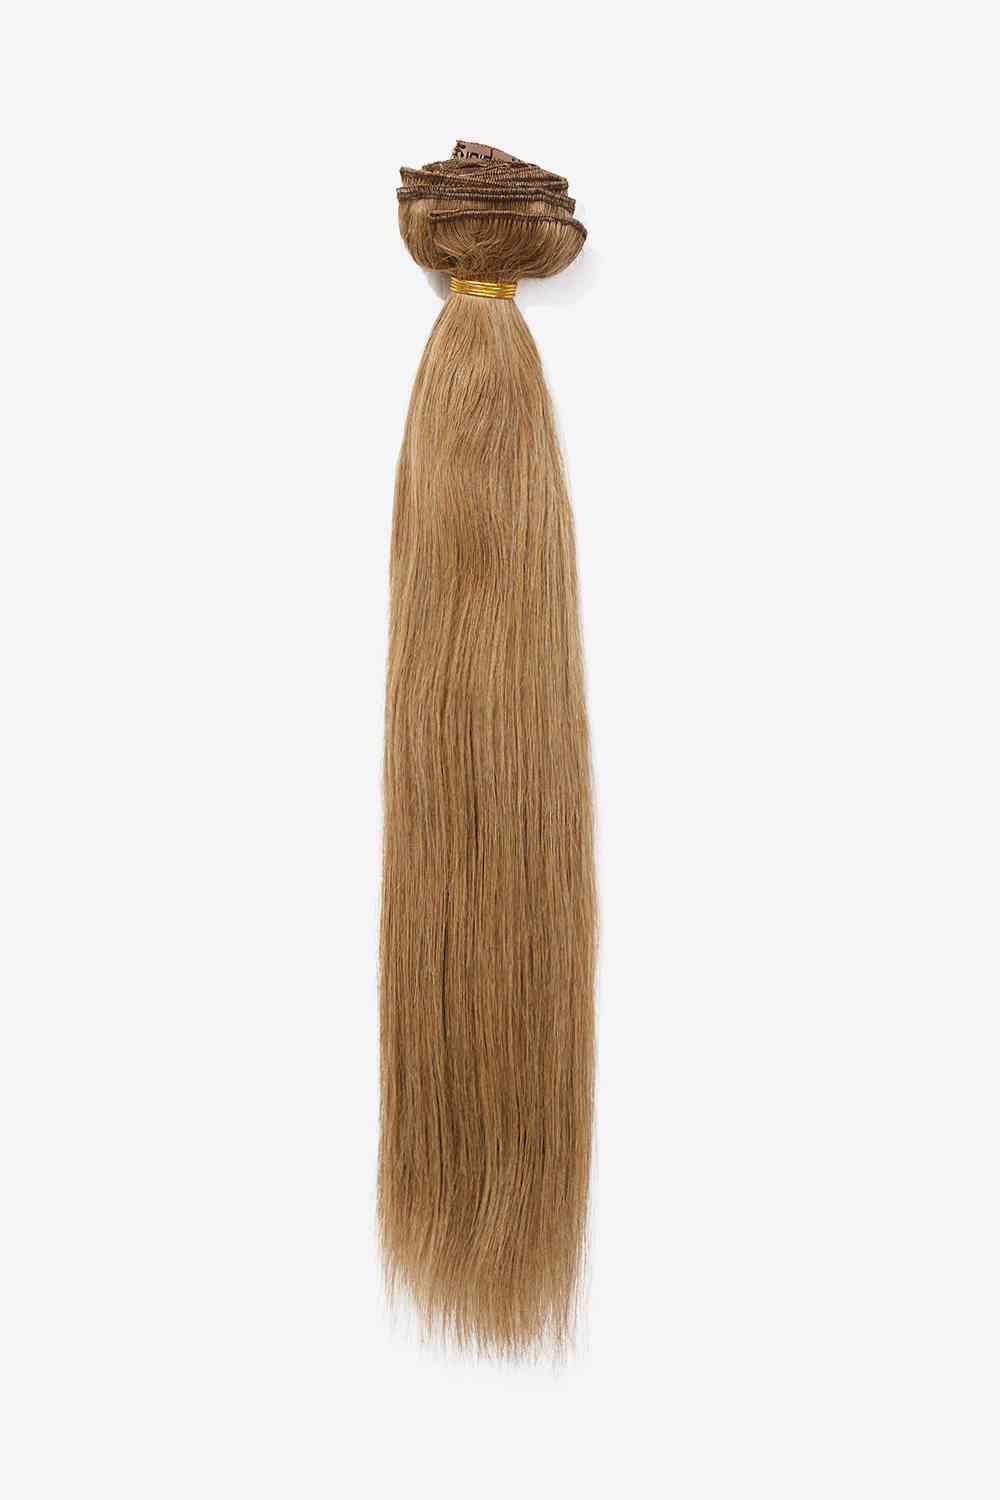 18''140g #10 Natural Straight Clip-in Hair Extensions Human Hair - lolaluxeshop